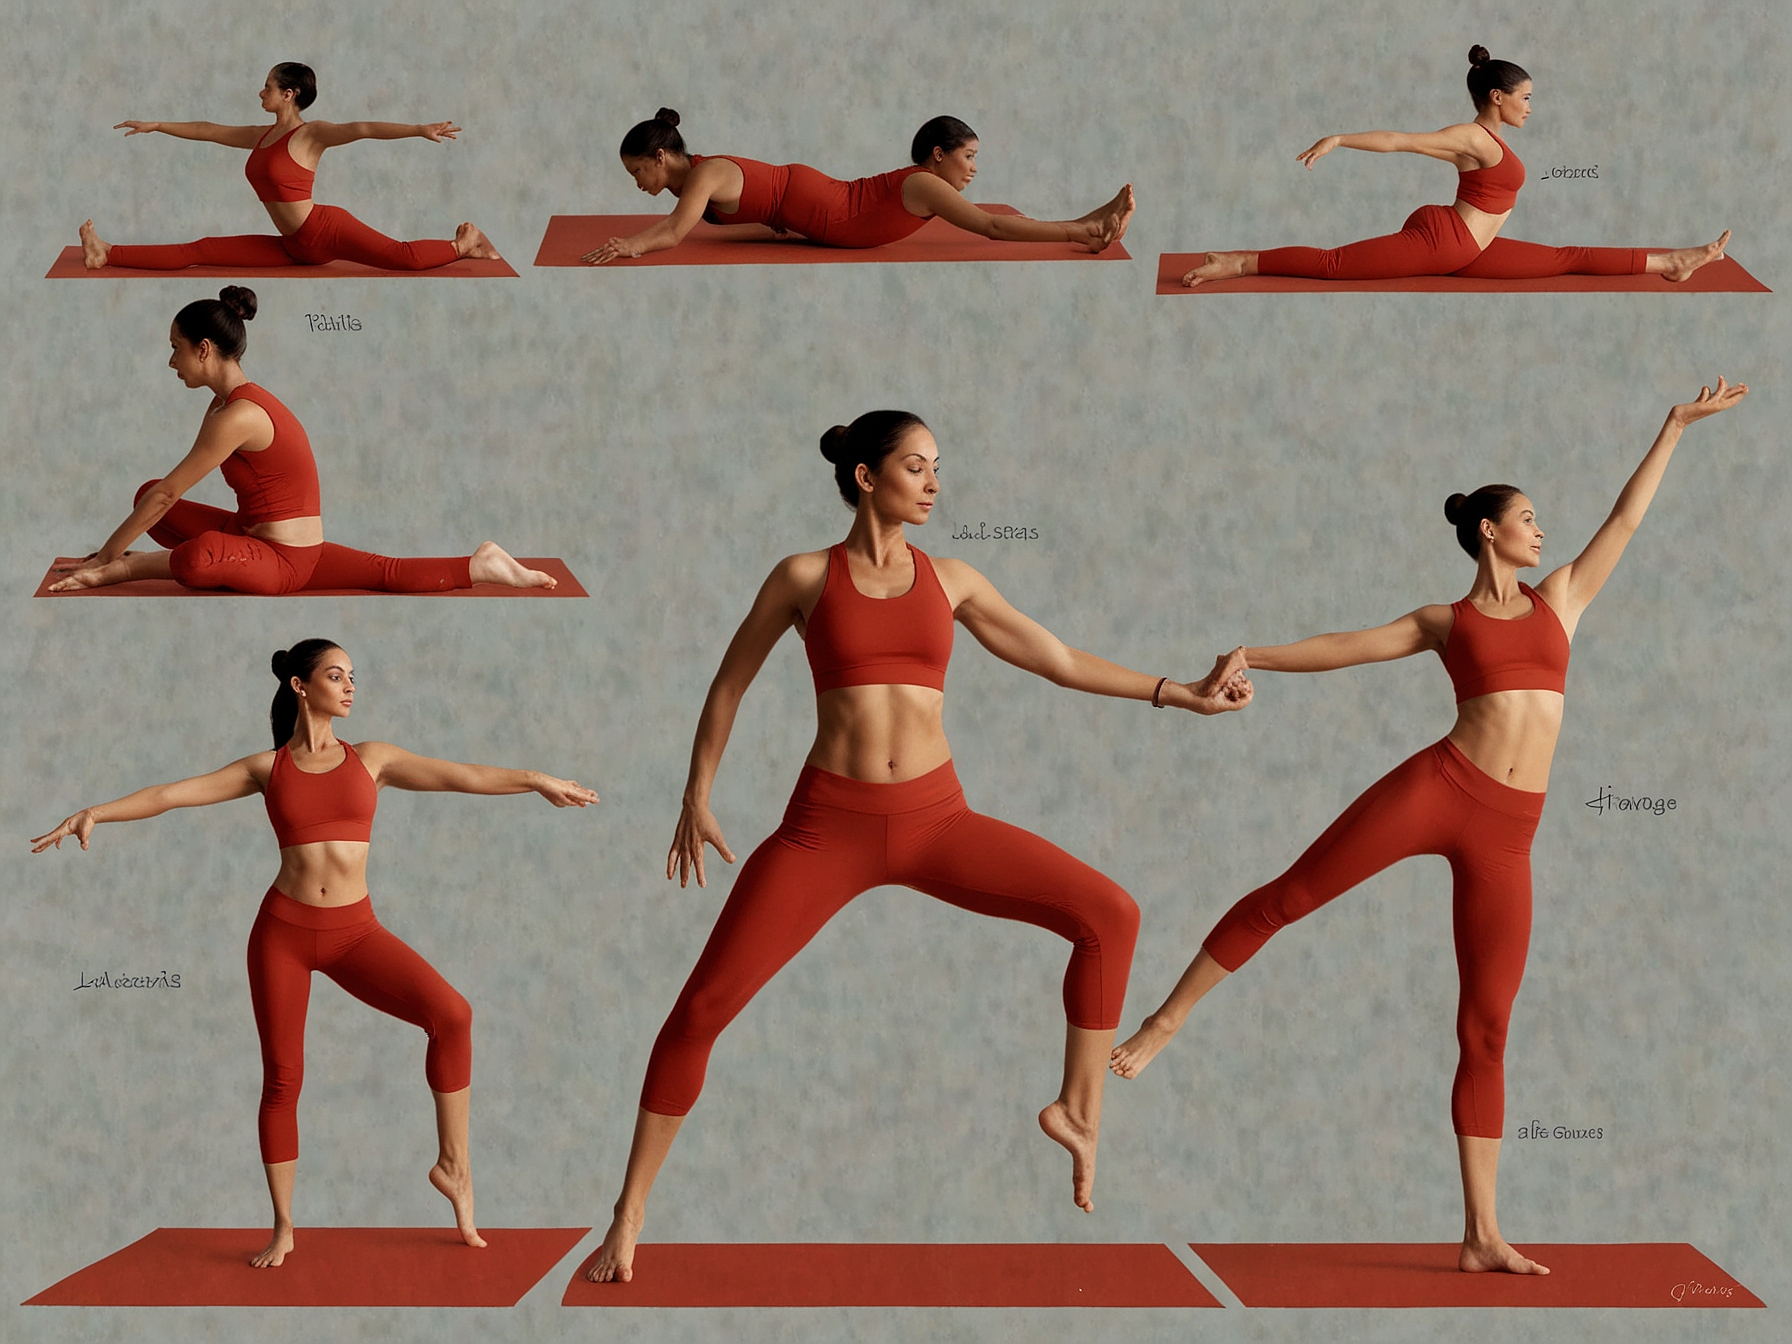 A collage of yoga asanas shared by Malaika Arora, demonstrating various poses and their benefits. This visual showcases how yoga aids in flexibility, strength, and emotional balance.